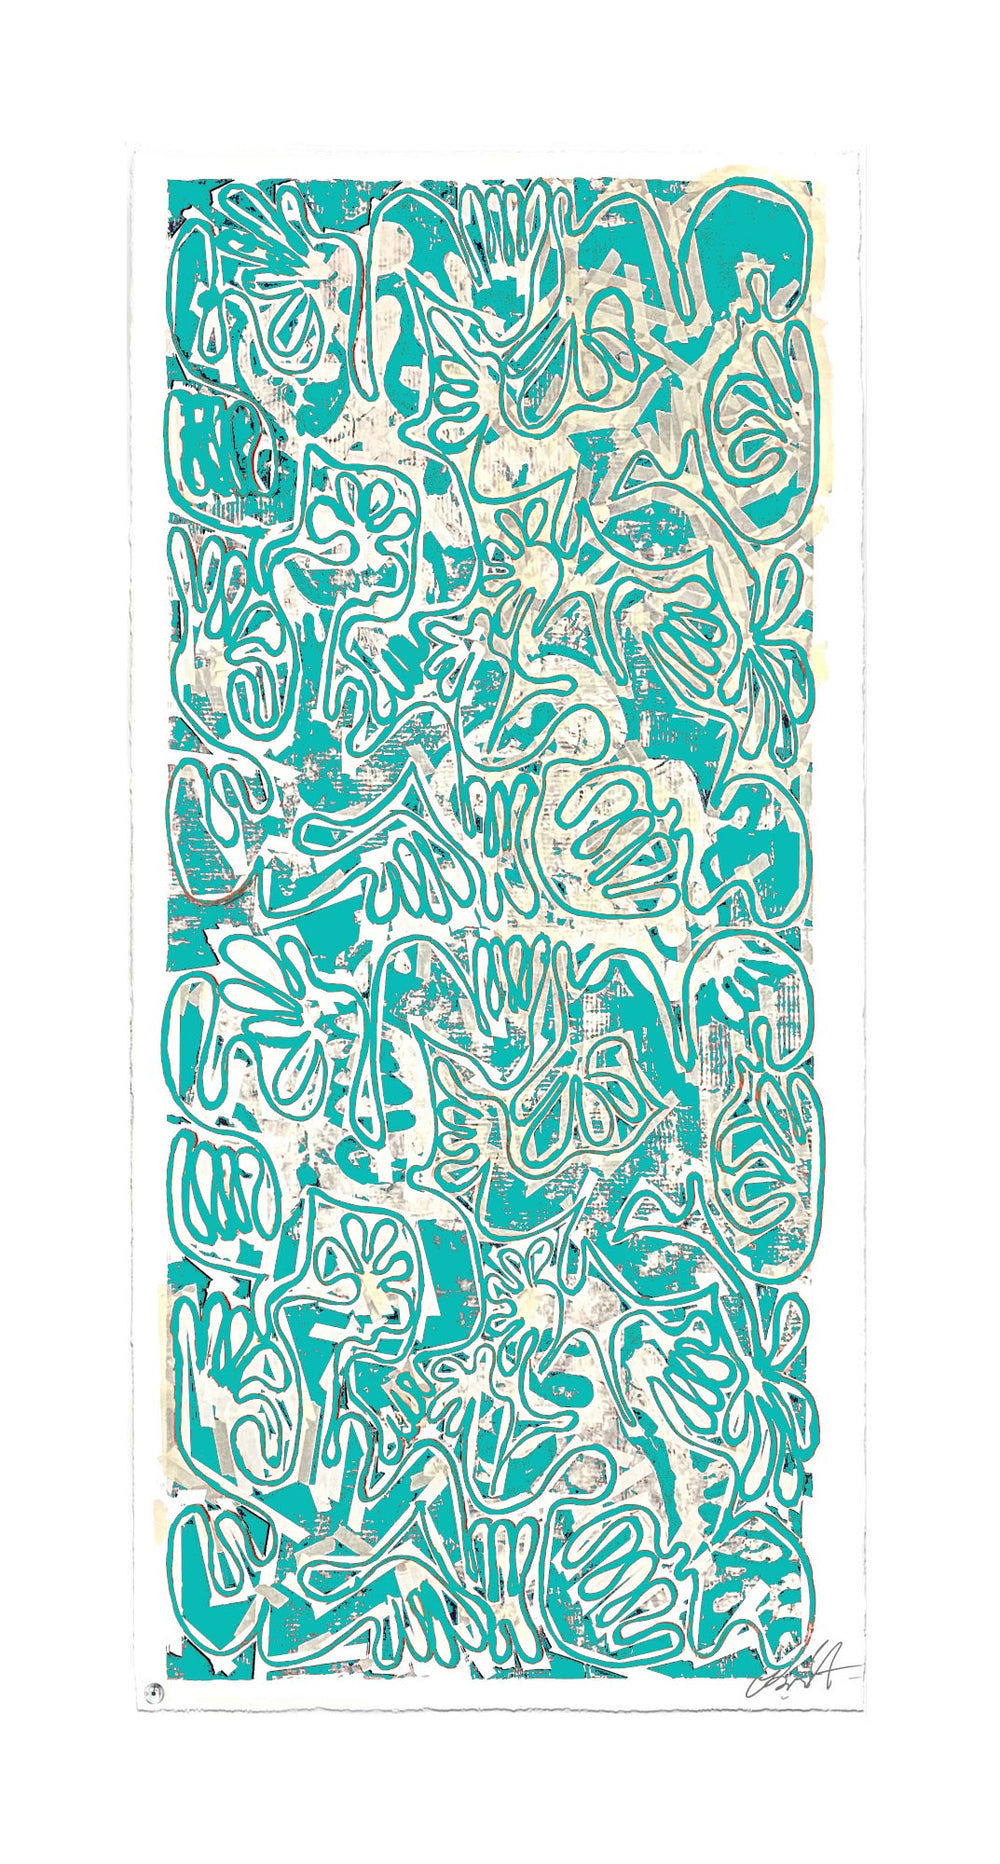 "Covid Chaos Tiffany Blue No 1" by Robert Santore ©2021. Framed, Hand painted artist silkscreen print, hand printed on the finest archival cold press cotton rag paper with hand torn edges. Painted in the Texas studio.